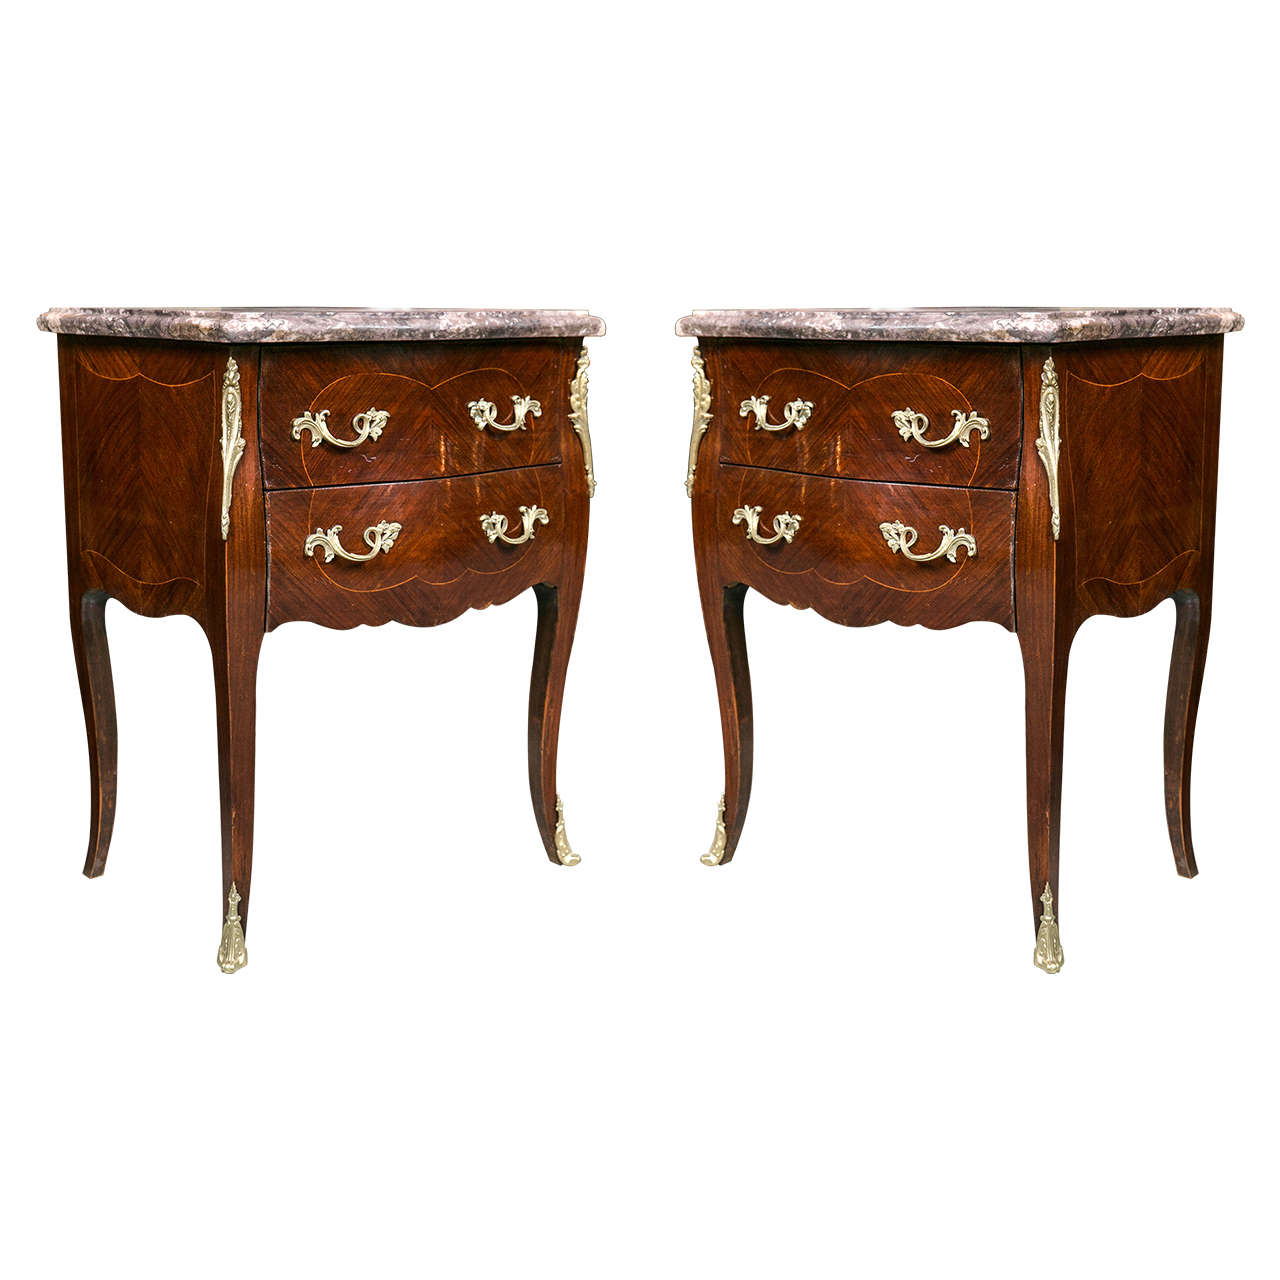 Pair of Bronze-Mounted Louis XV Style End Tables or Commodes